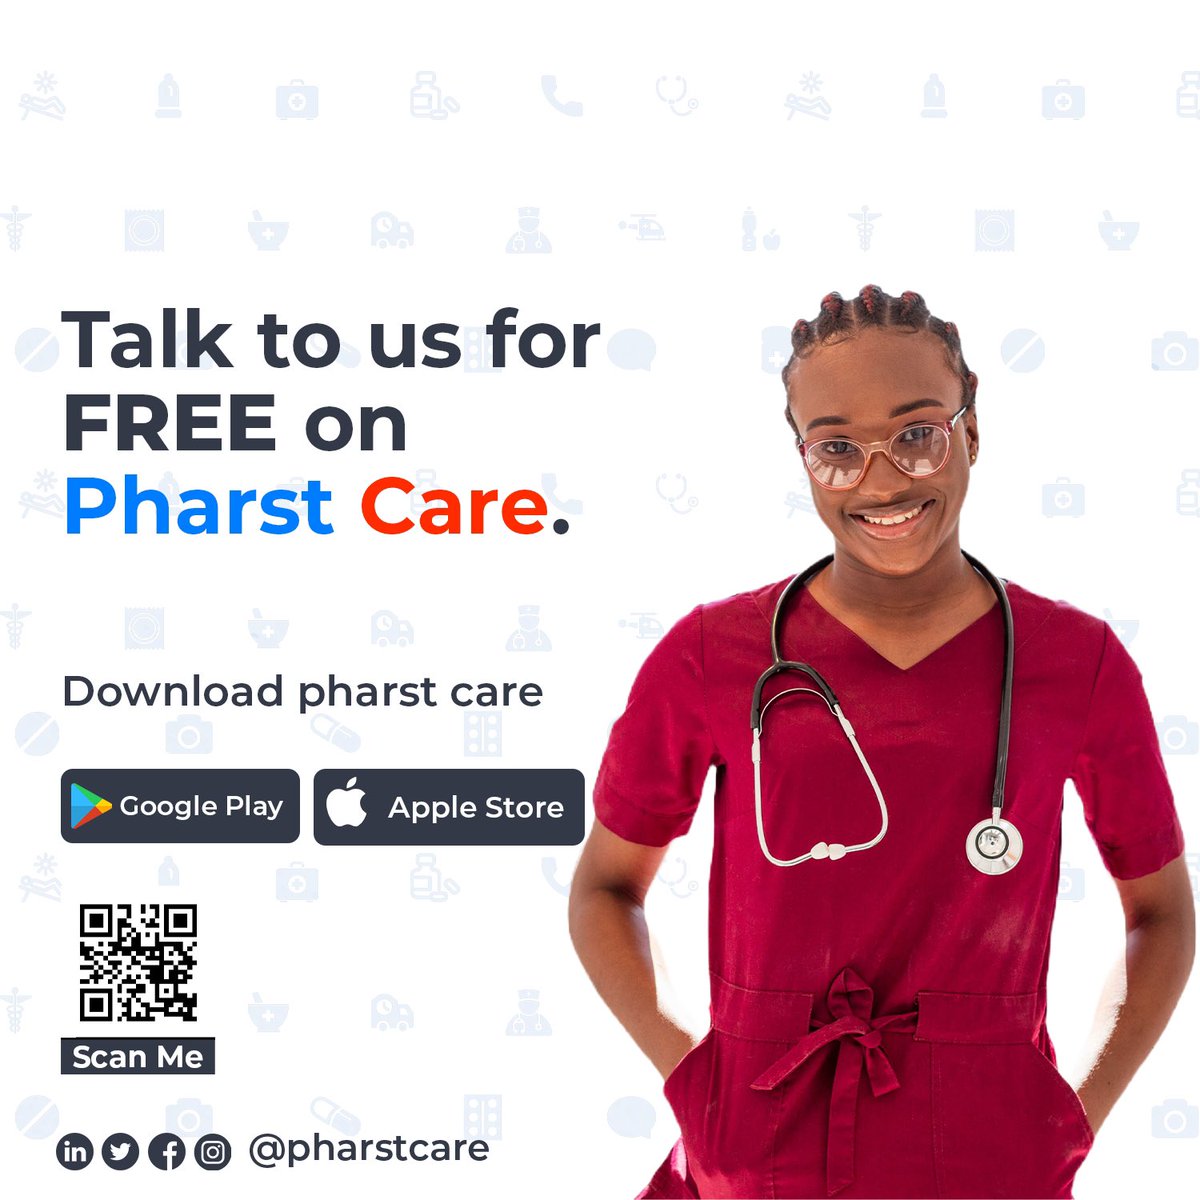 Connect with us for free on Pharst Care. Your well-being matters. Download Pharst Care now and start a conversation about your health.👇
pharst.care/?link=sharepha…
#pharstcare
#digitalpharmacy
#pharmacy